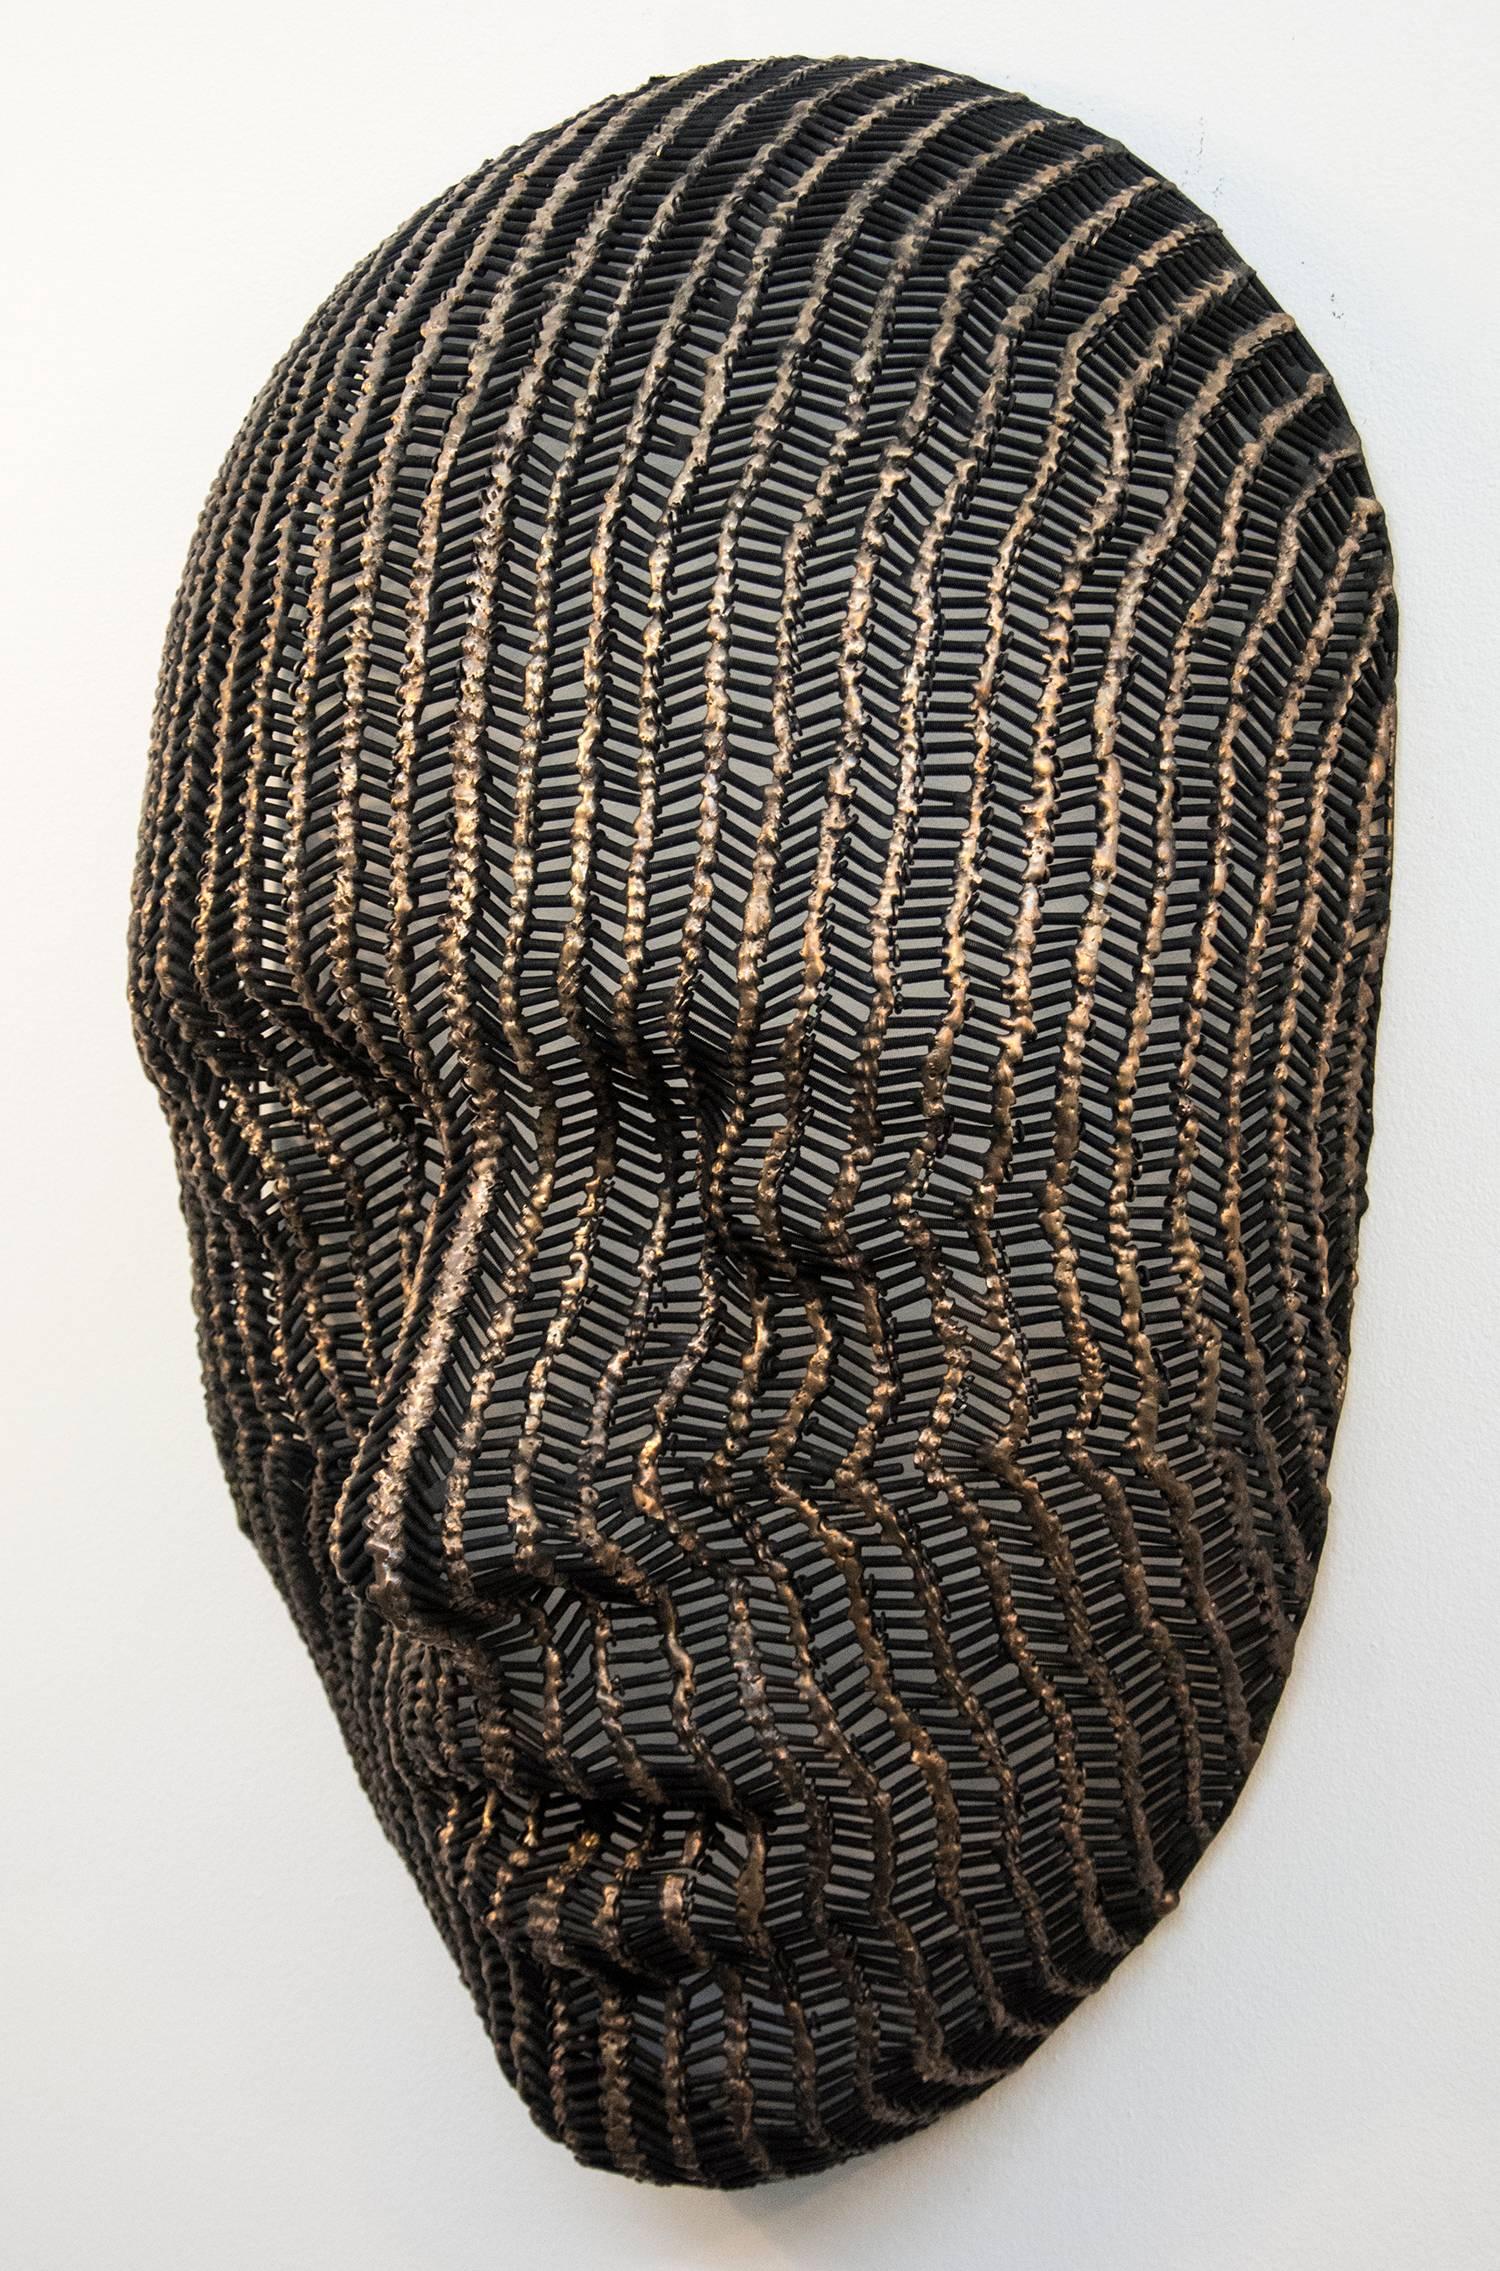 Herringbone - Contemporary Sculpture by Dale Dunning